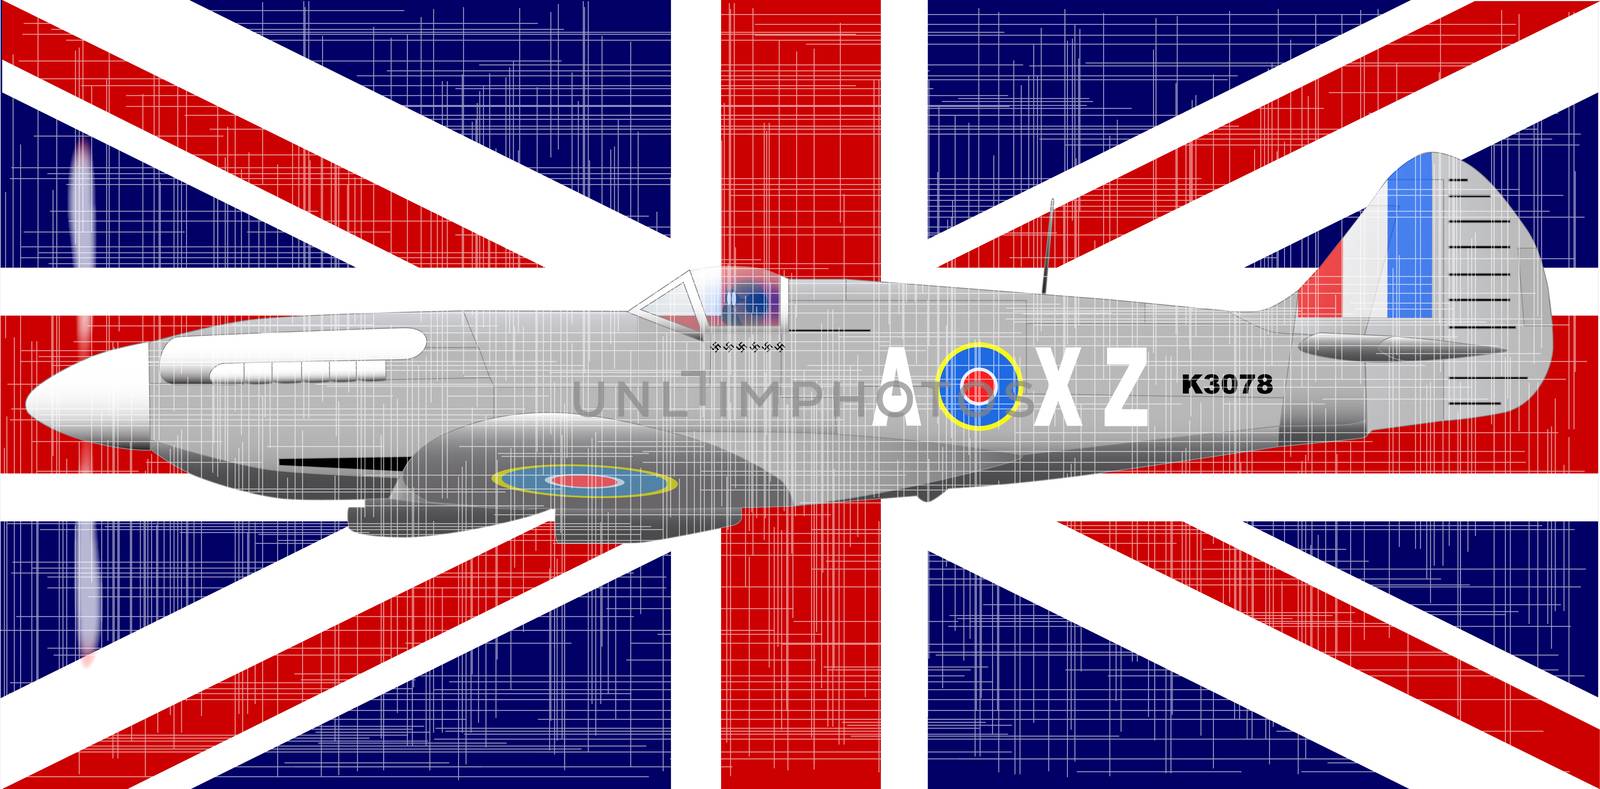 The British Union Jack flag and fighter aircraft with a heavy grunge effect.